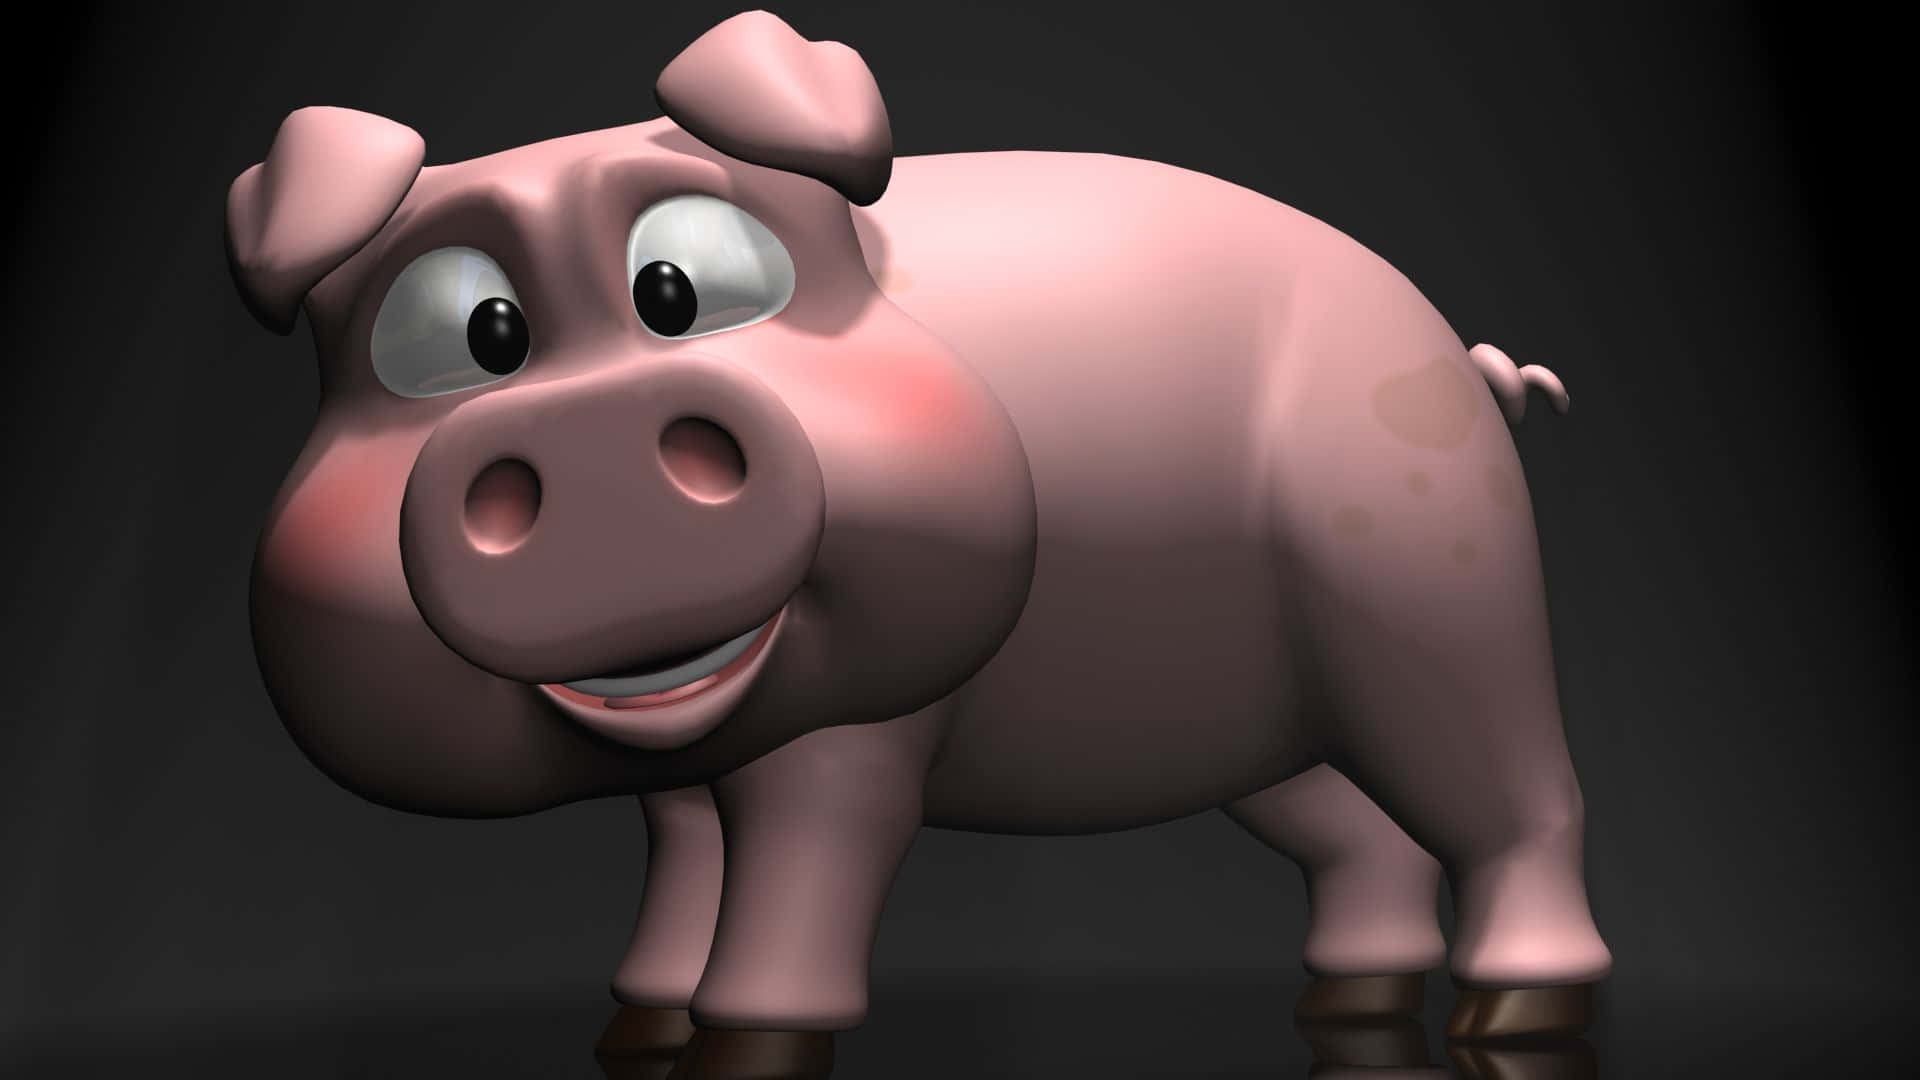 A content piggy looking for good luck